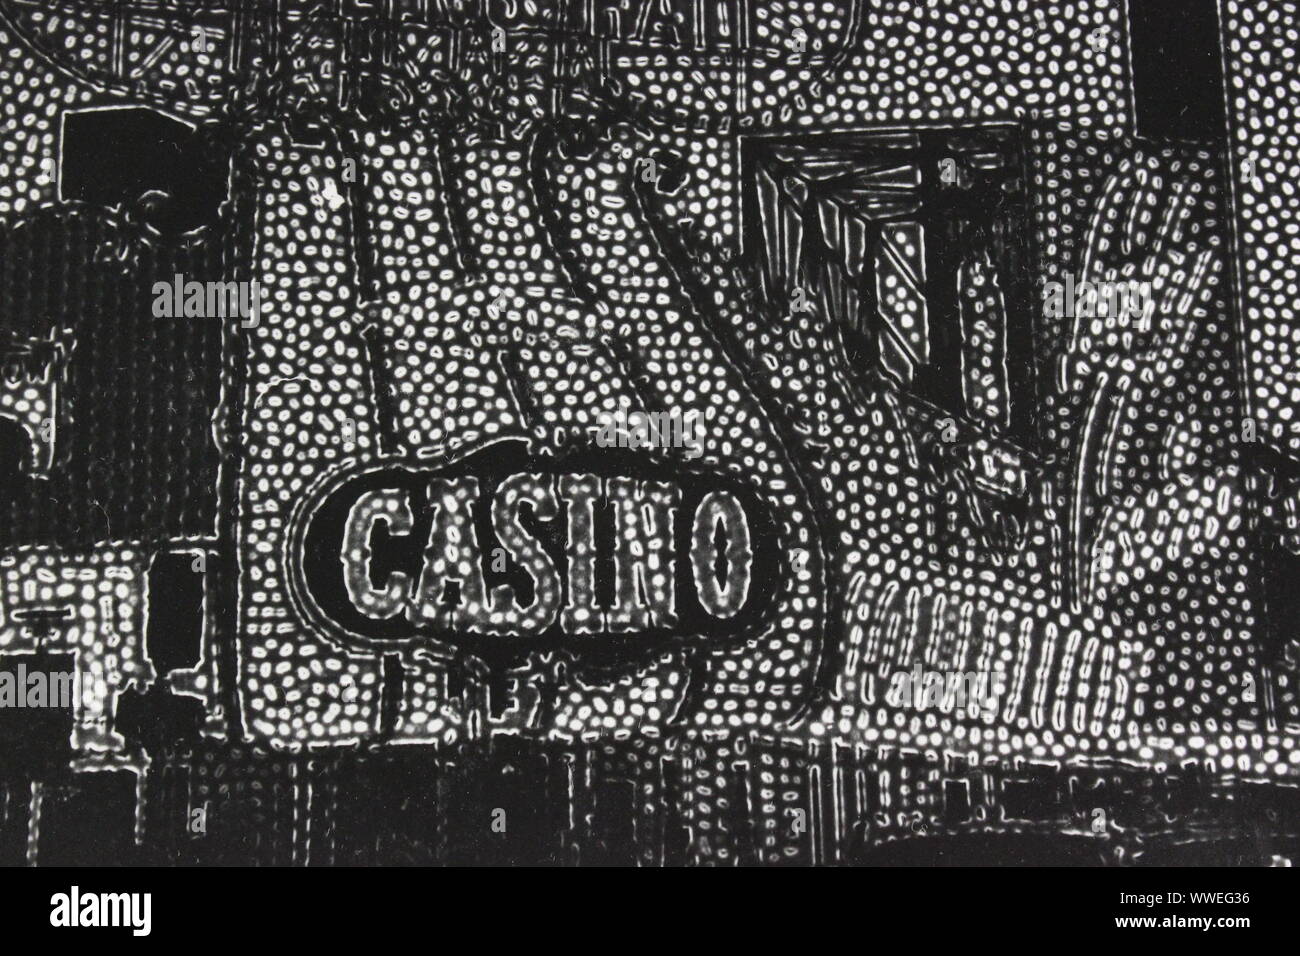 Fine black and white art photography from the 1970s of Las Vegas/ iconic Golden Nugget Casino neon marquee sign in high contrast. Stock Photo